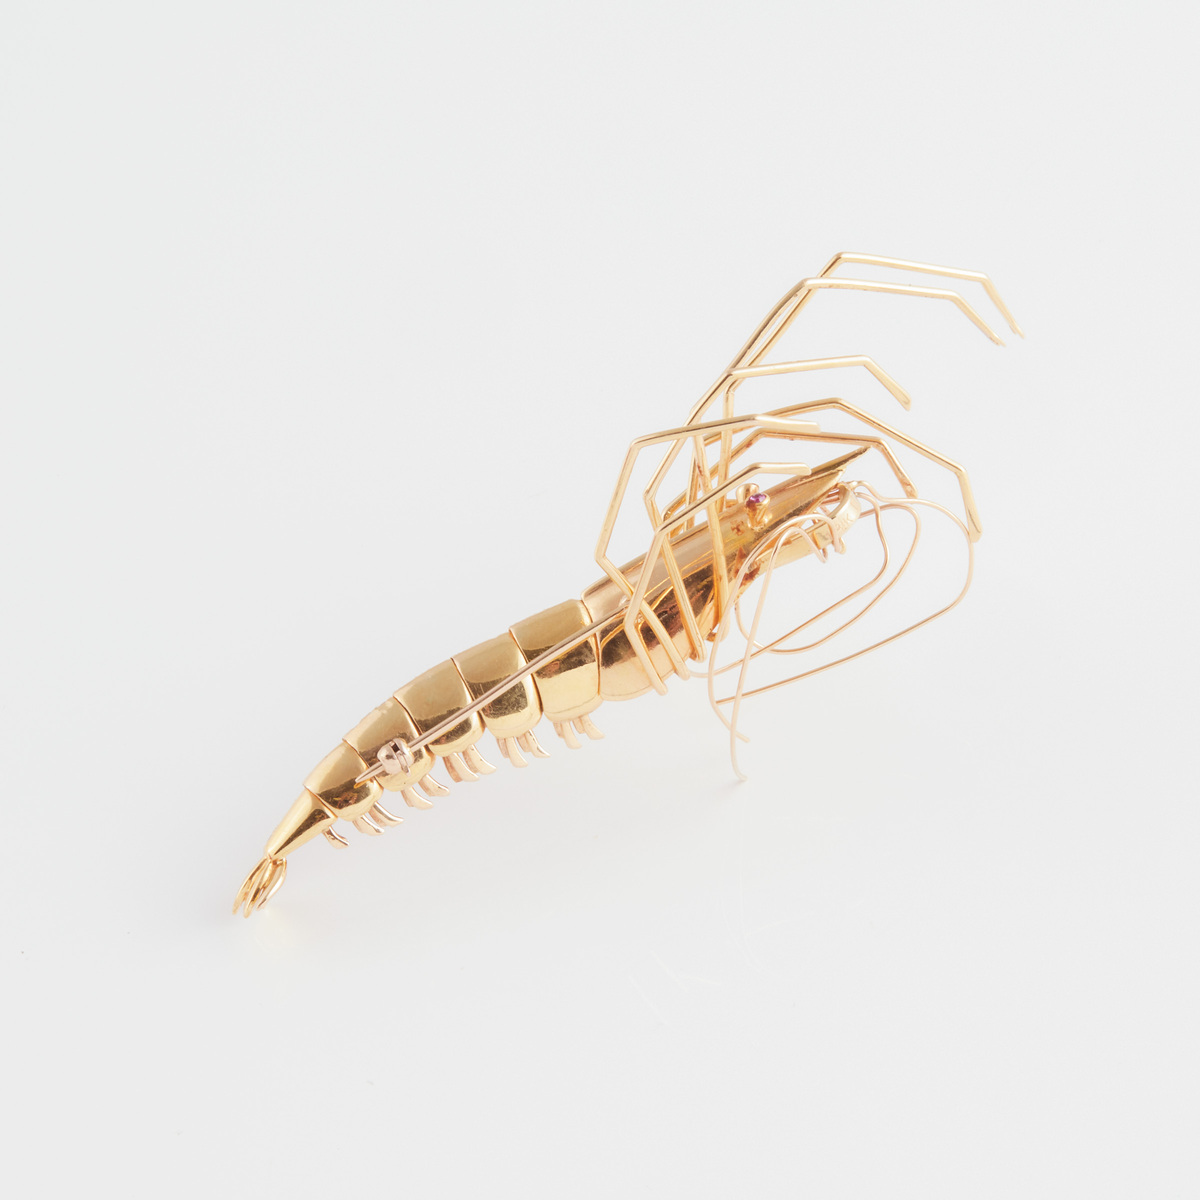 18k Yellow Gold Brooch, realistically formed as an articulated shrimp and set with 154 small brillia - Image 2 of 2